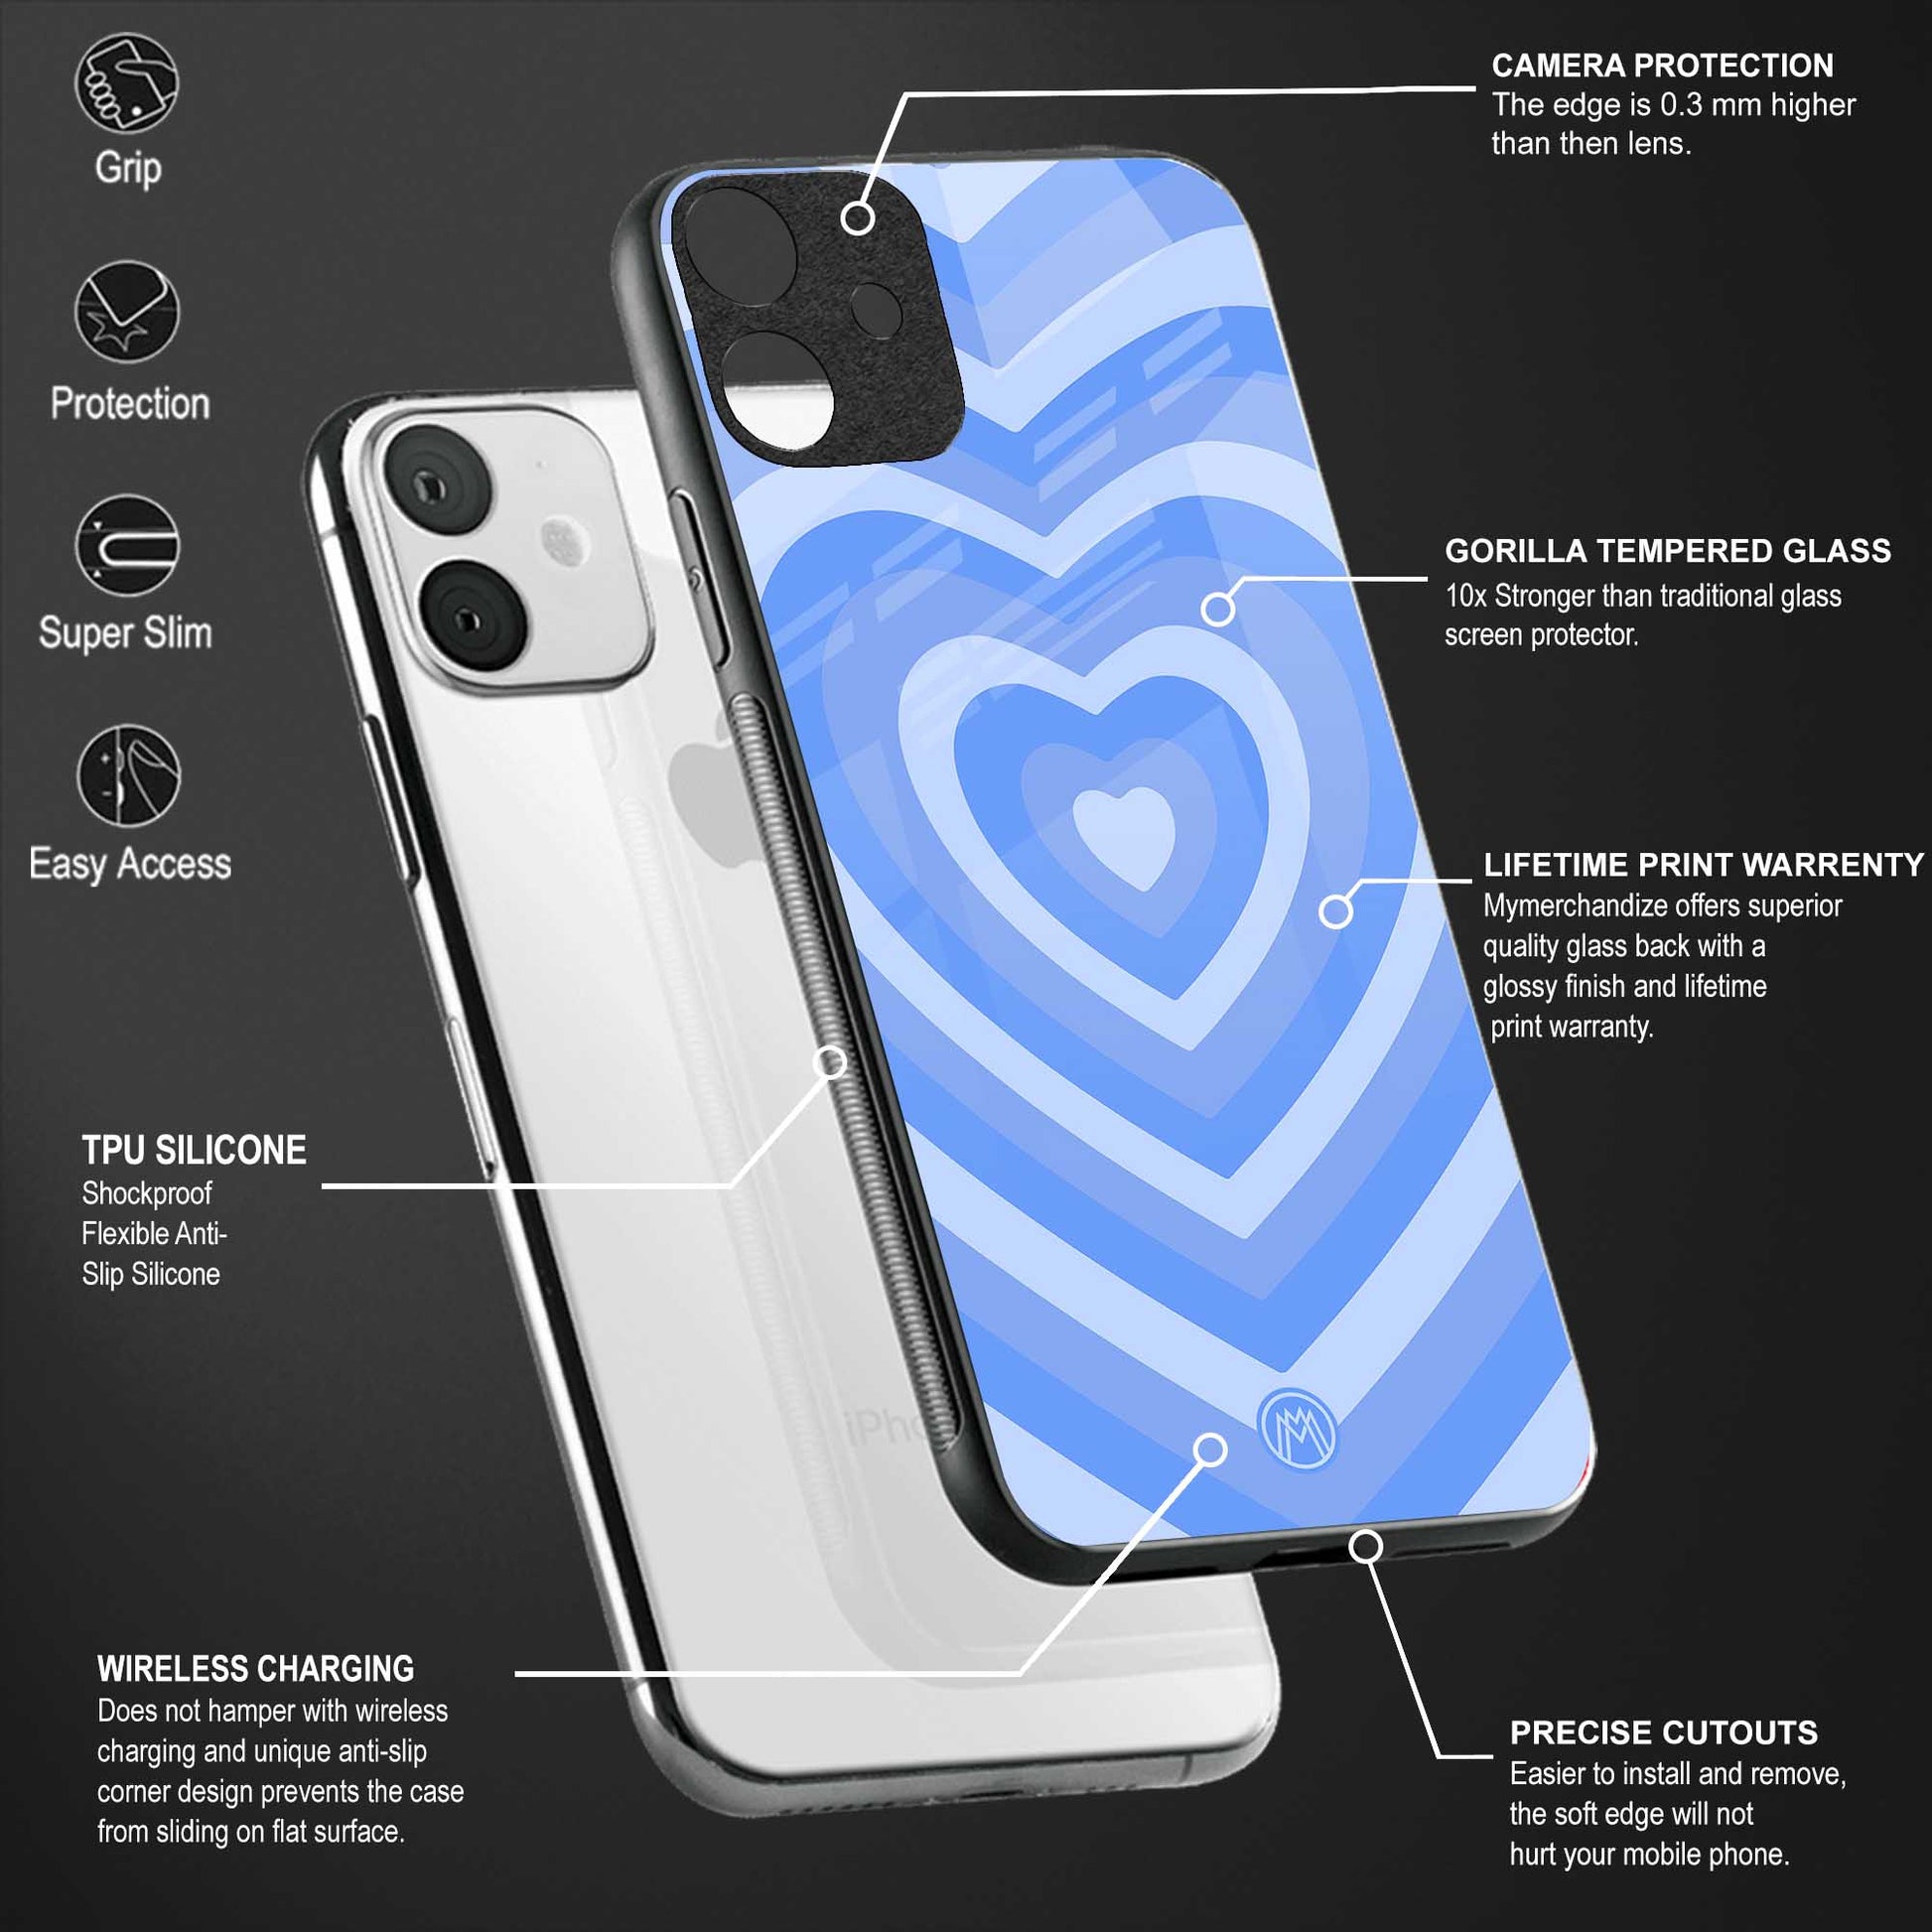 y2k blue hearts aesthetic back phone cover | glass case for samsun galaxy a24 4g